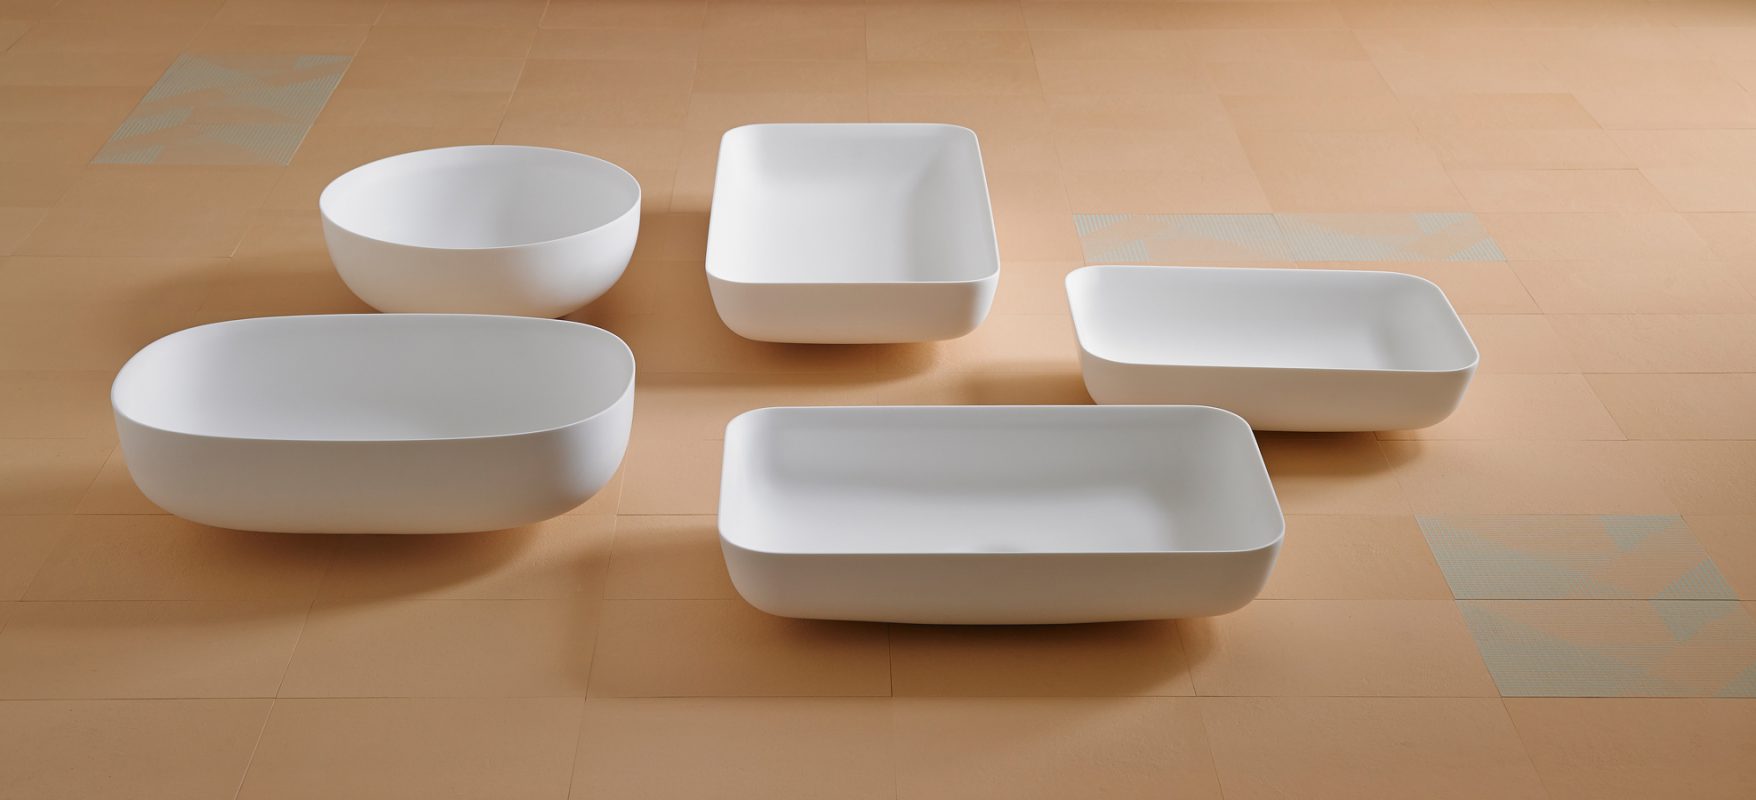 collection of cerclo, ovalo and quadro corian top or undeer mounted washbasins